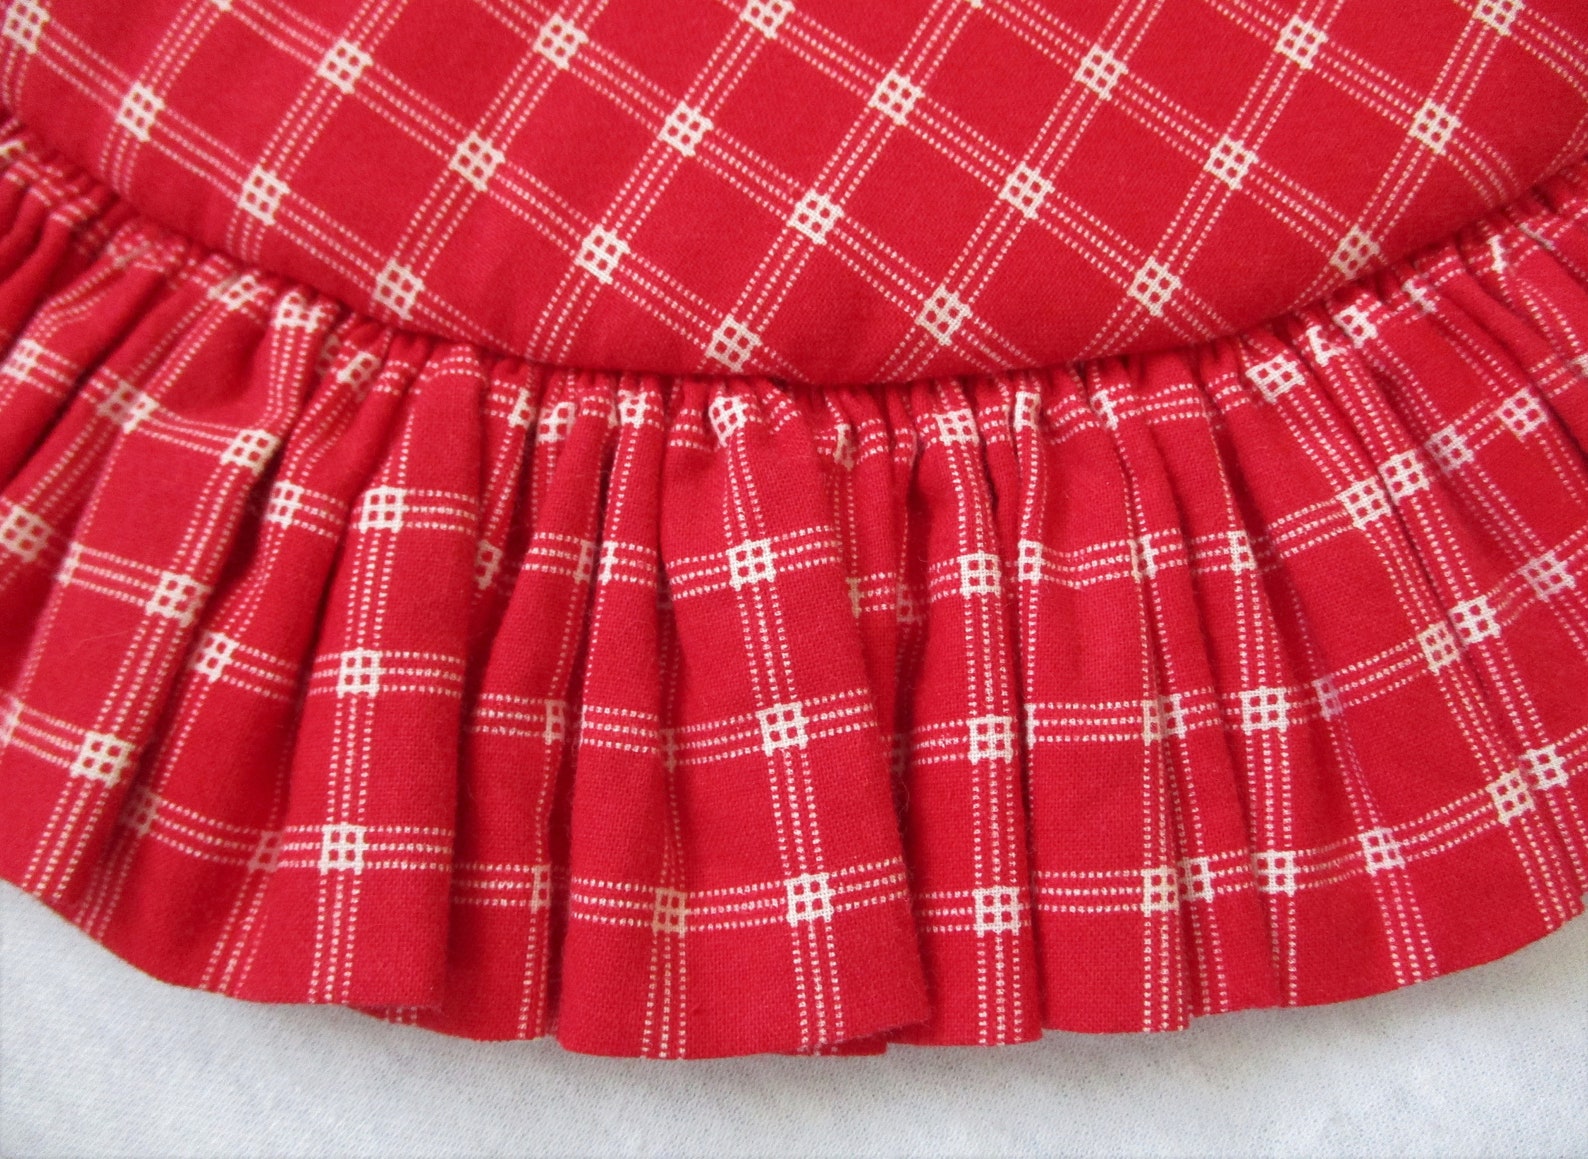 Handmade Placemats Ruffled Red Plaid Round Country Placemat | Etsy